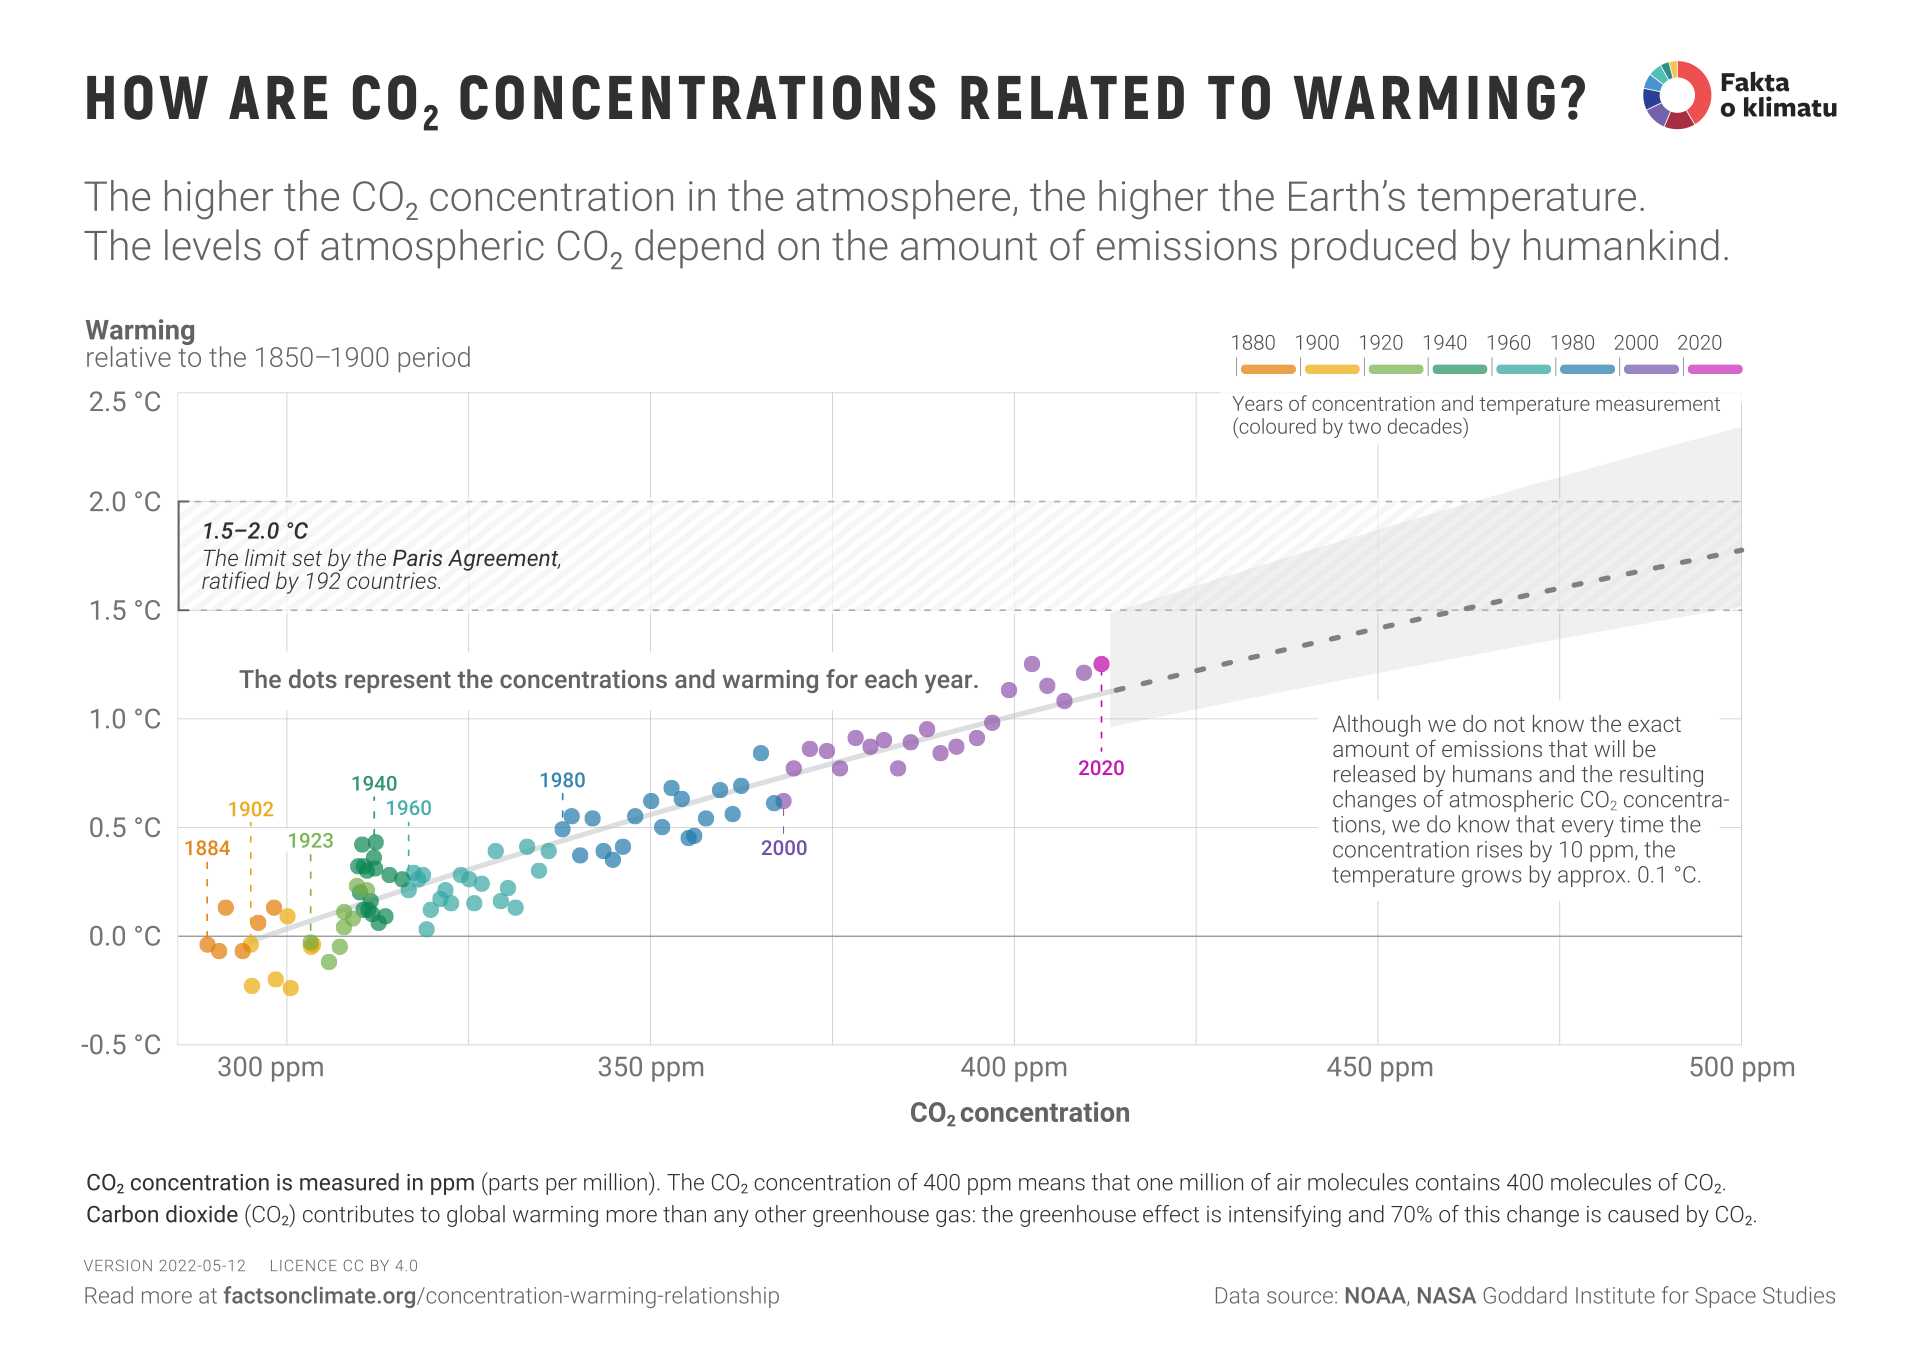 How are CO2 concentrations related to warming?